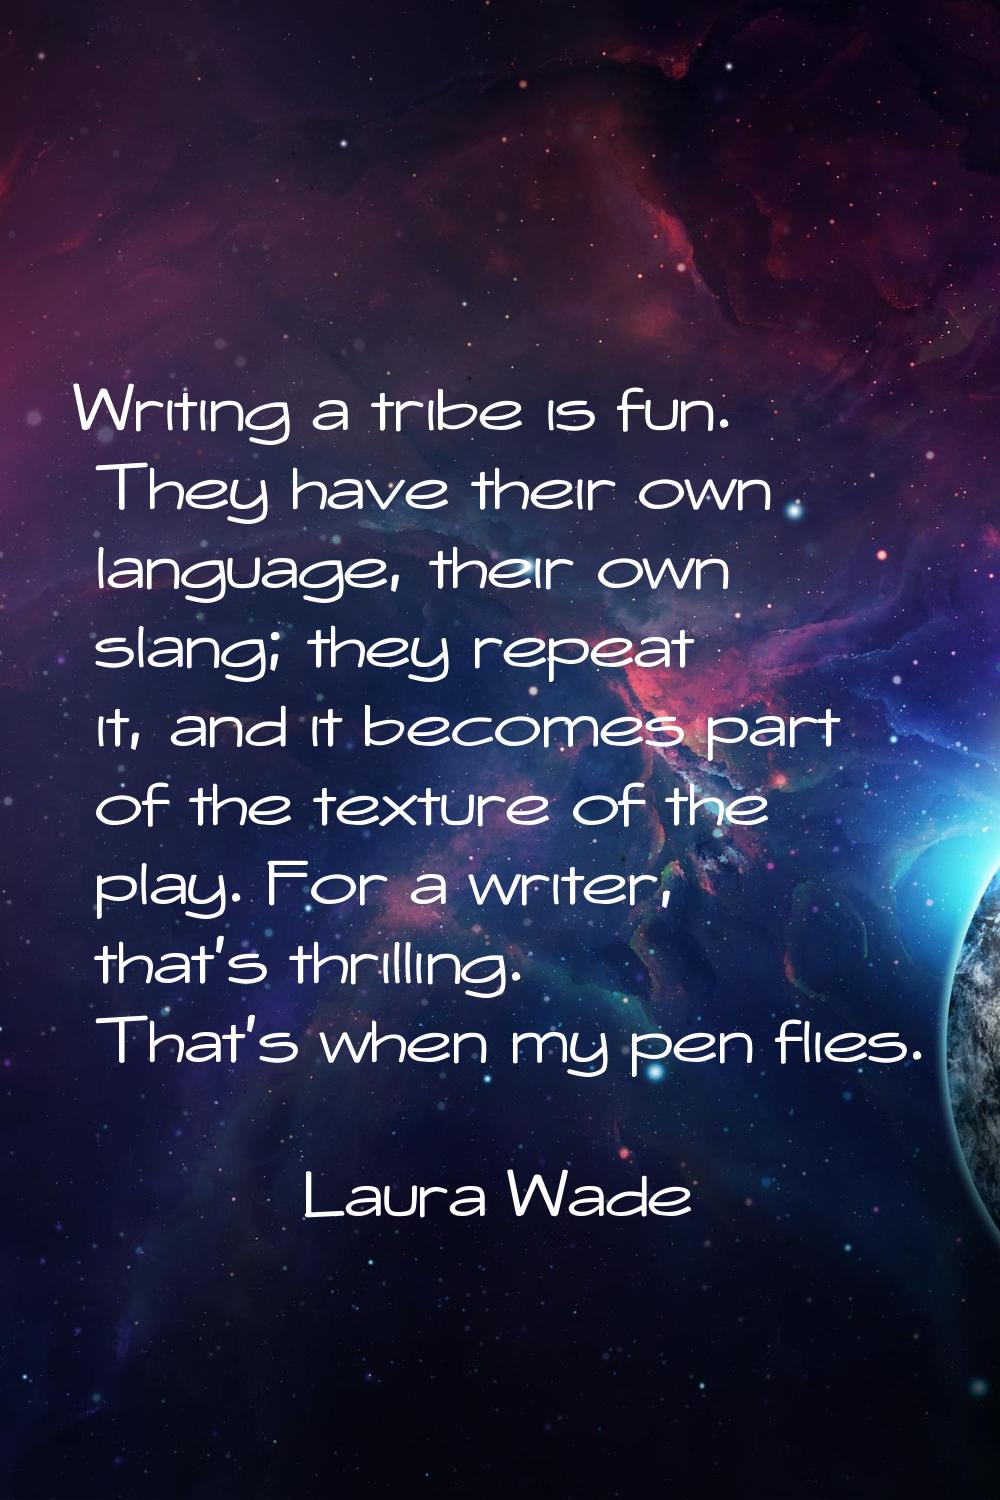 Writing a tribe is fun. They have their own language, their own slang; they repeat it, and it becom